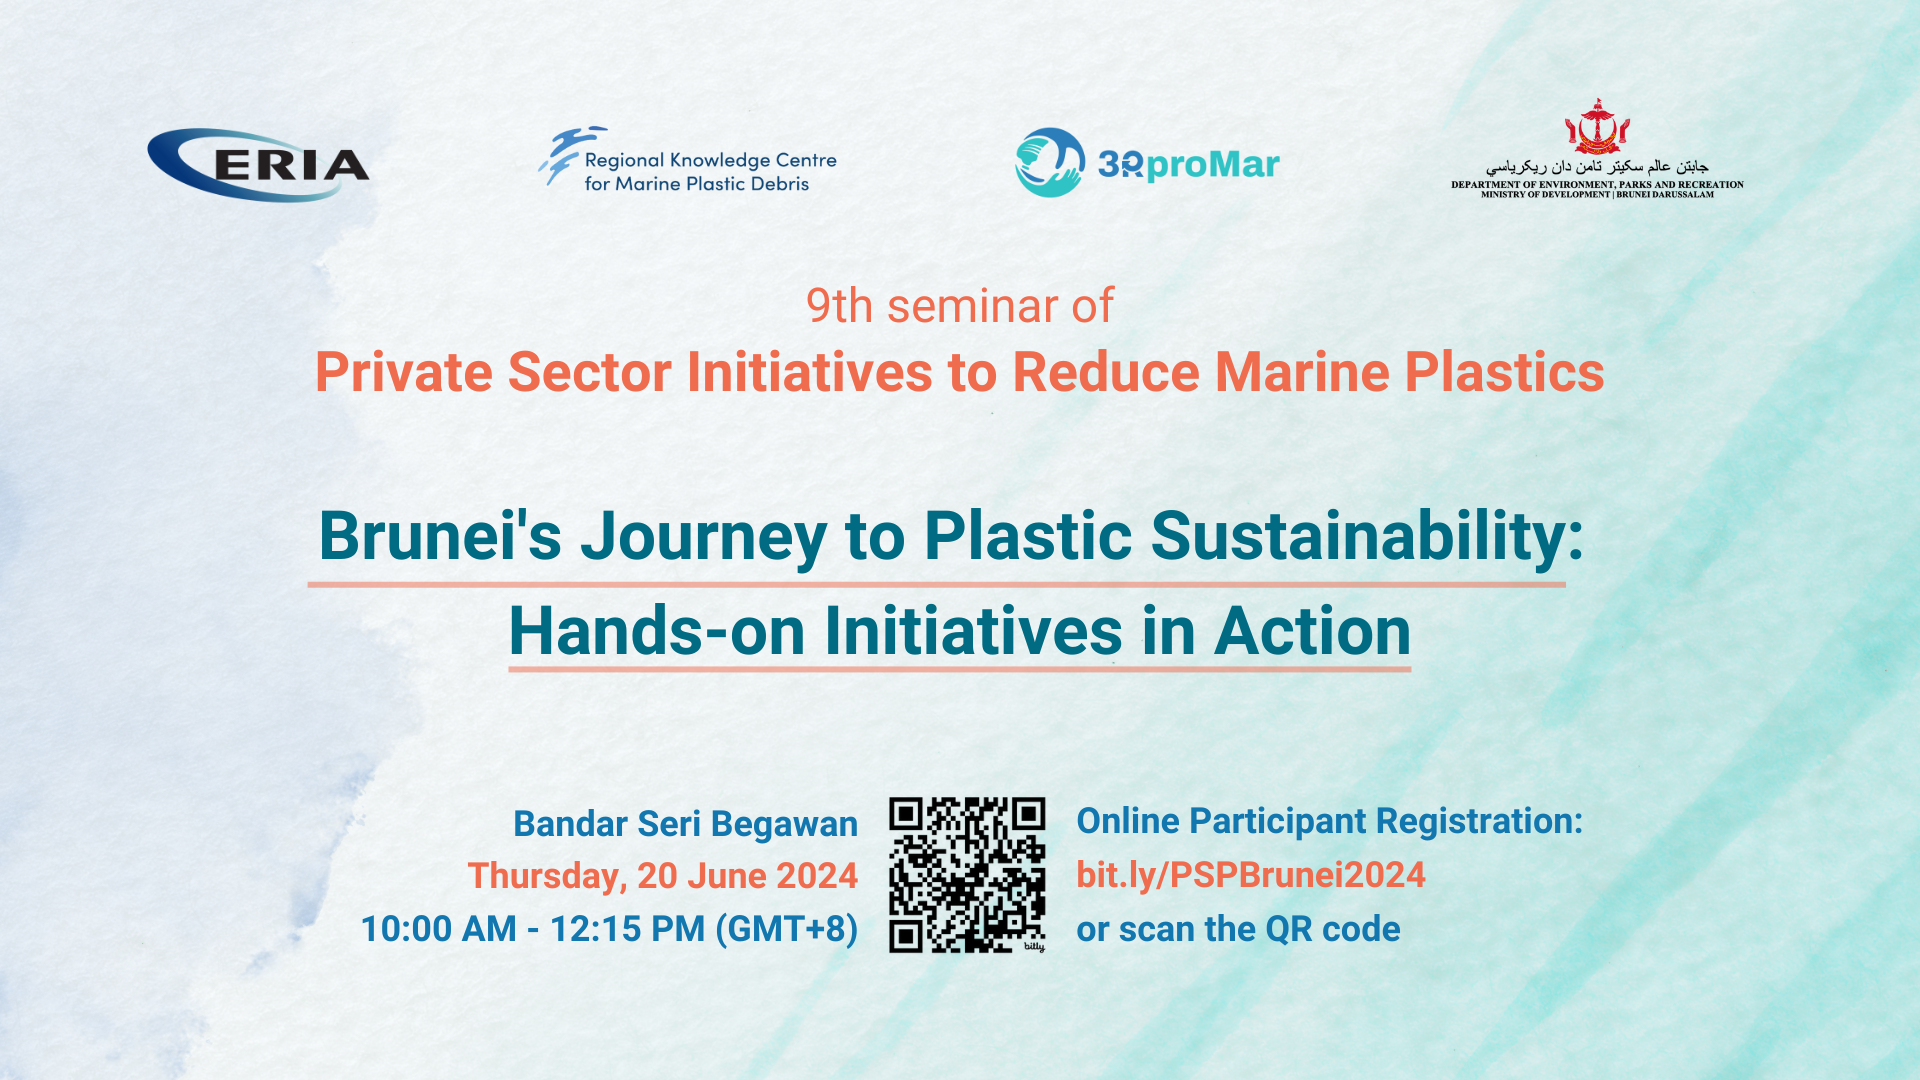 Registration Open for Webinar on Private Sector Initiatives to Reduce Marine Plastics “Brunei's Journey to Plastic Sustainability: Hands-on Initiatives in Action”